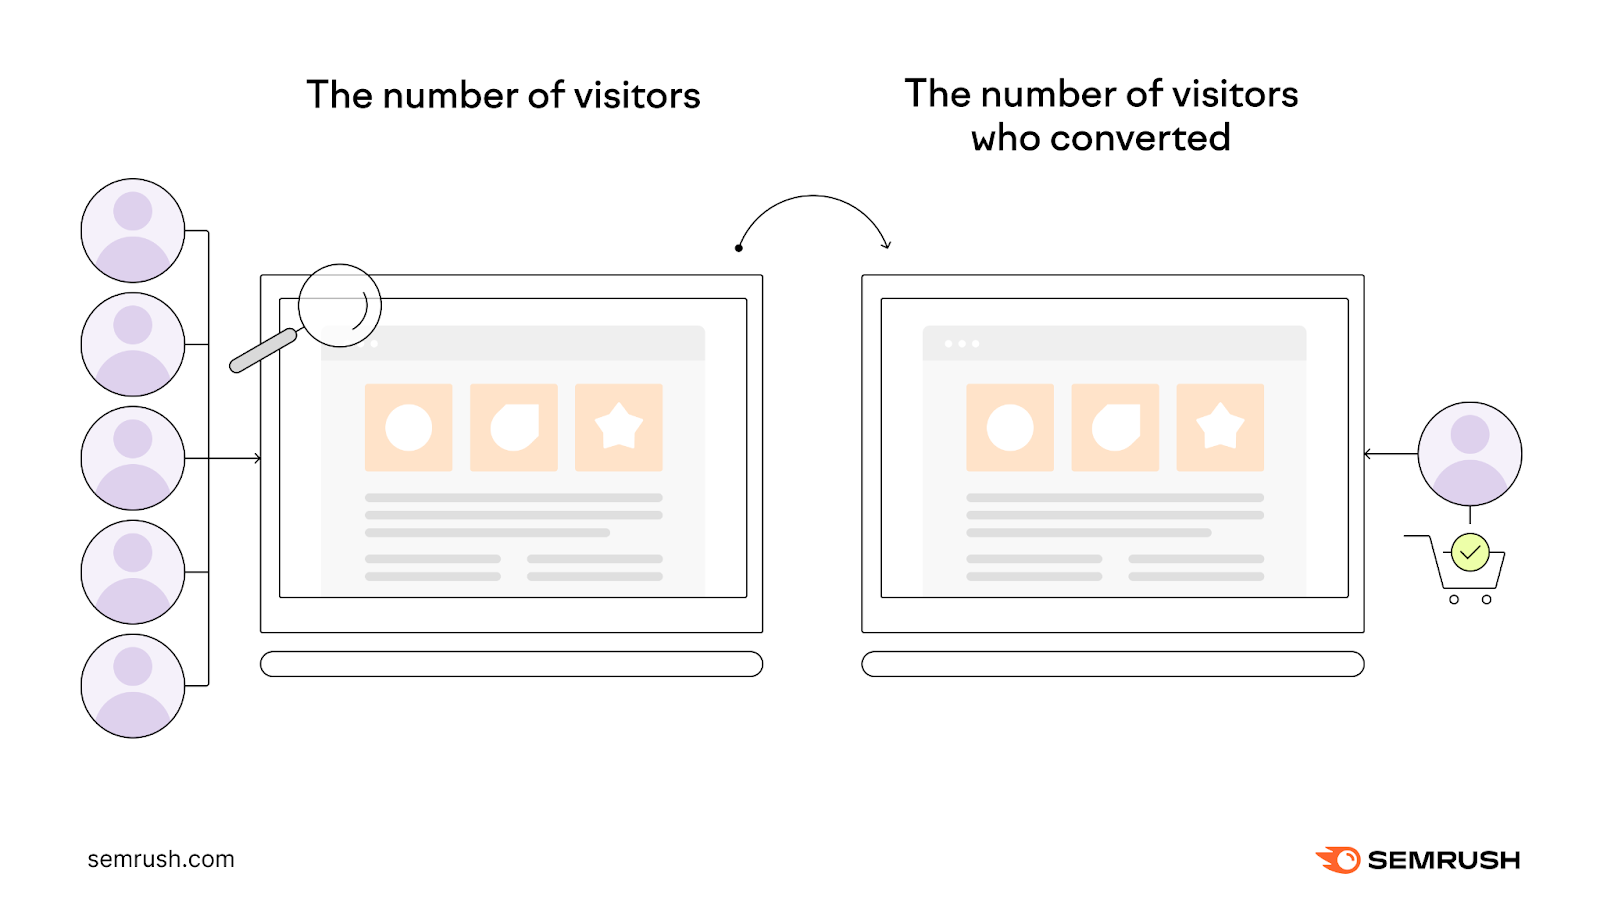 A website showing the number of visitors (left) and a number of visitors who converted (right)